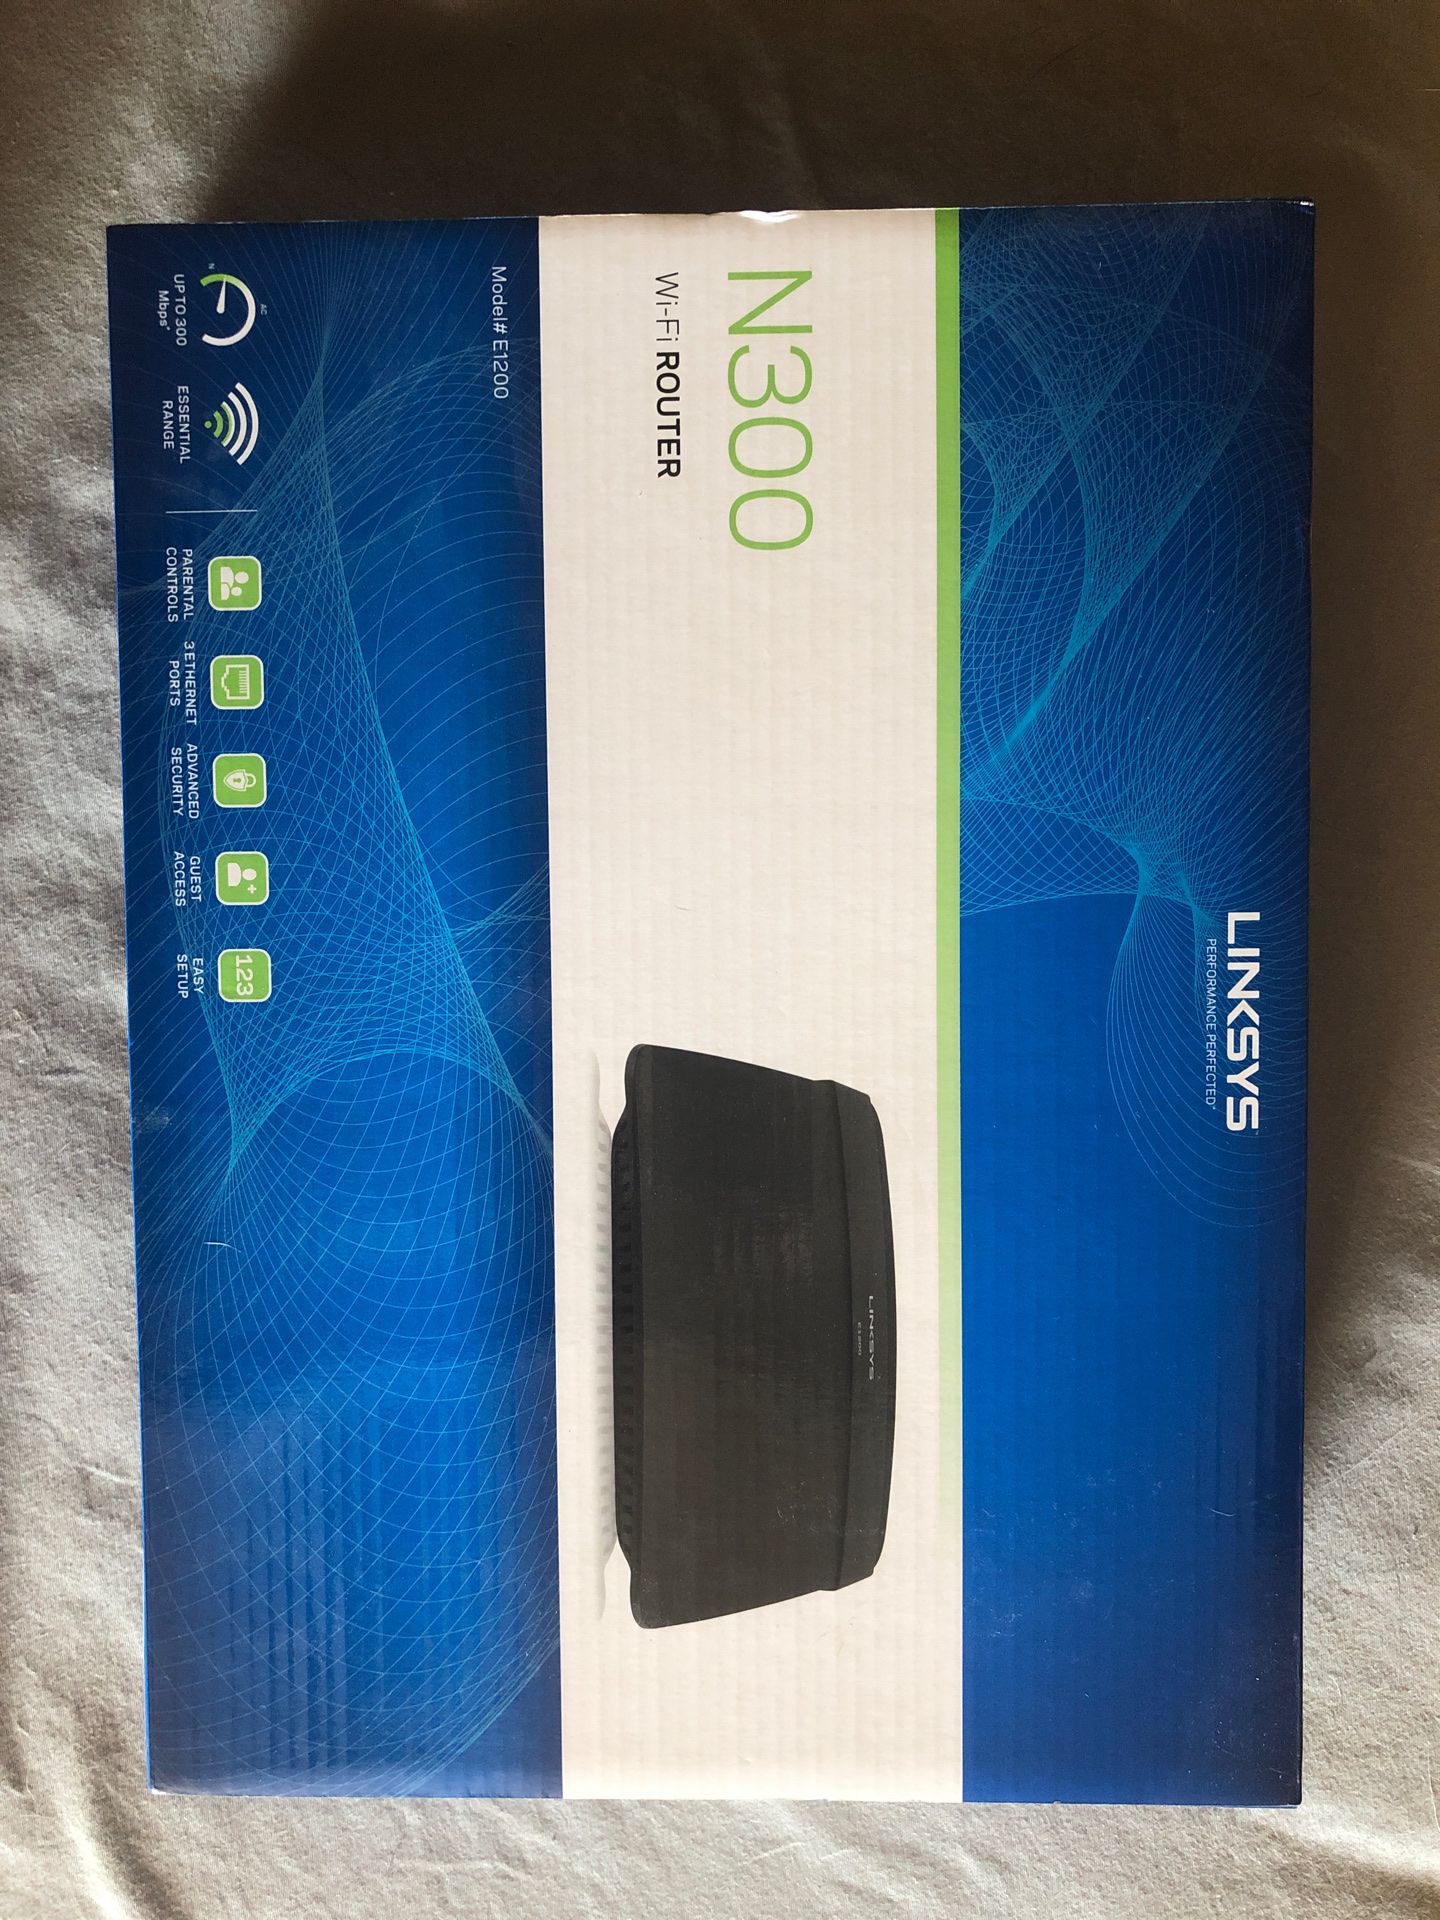 LINKSYS N300 router